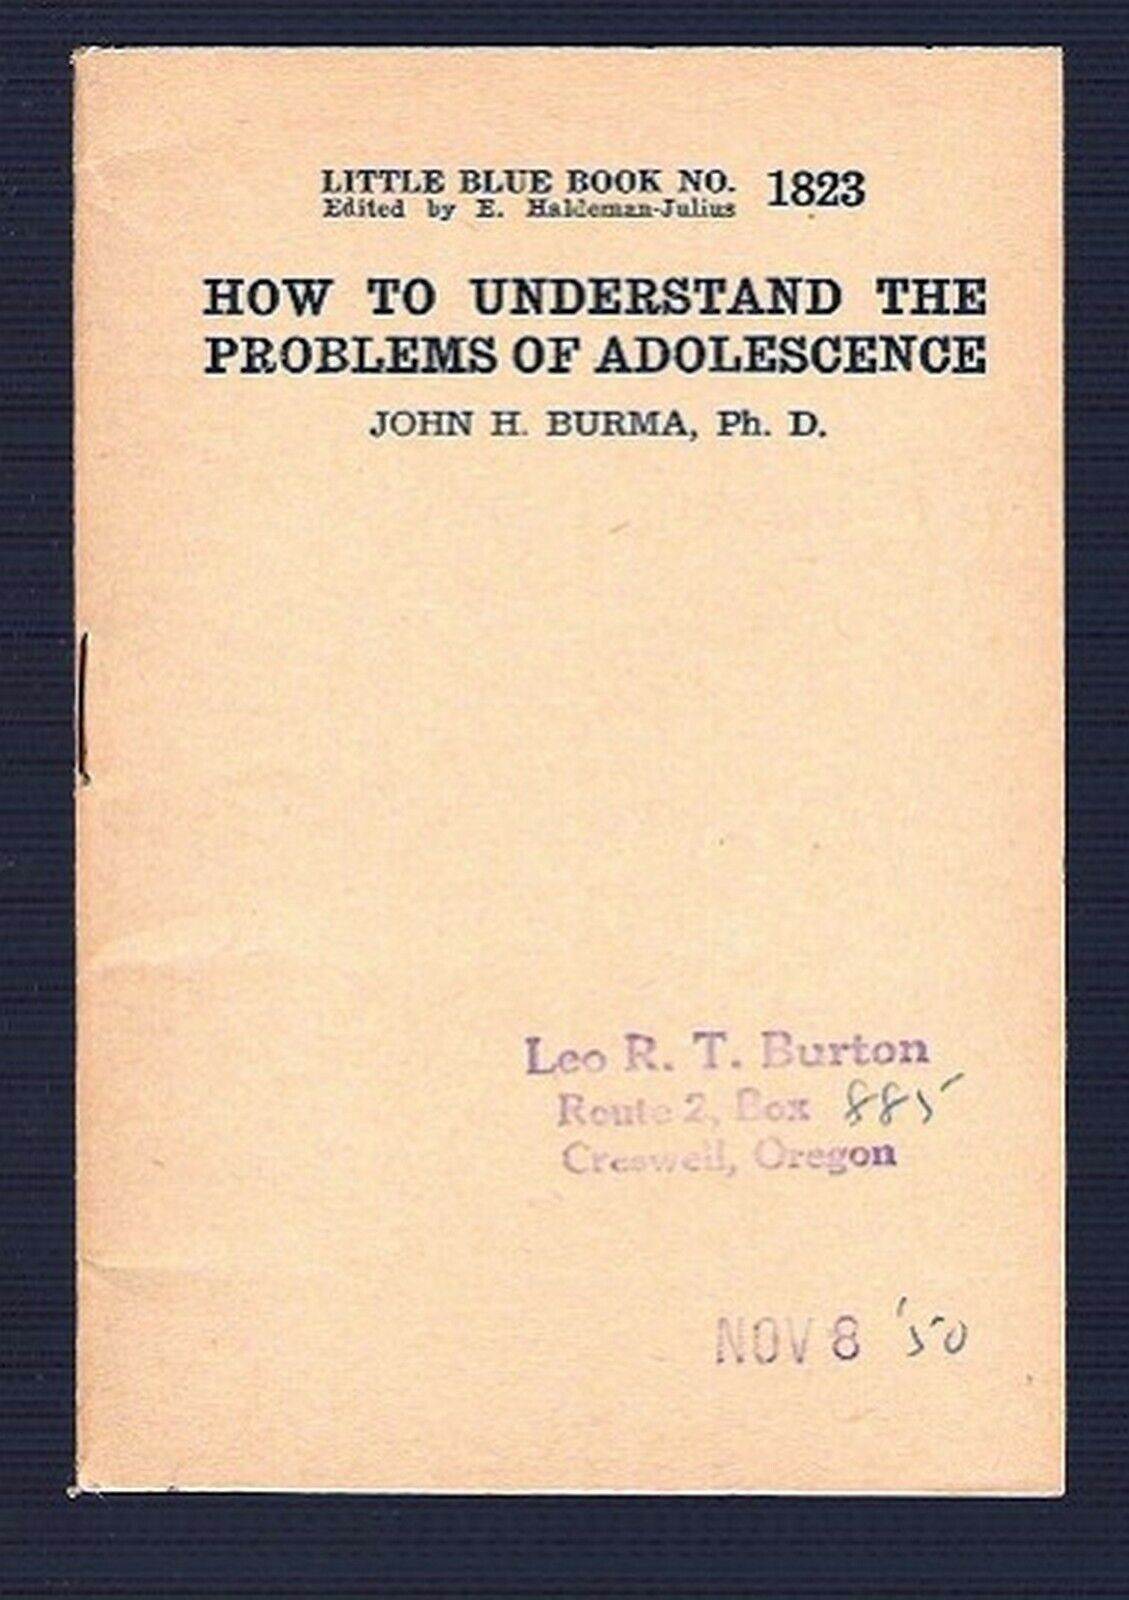 BLUE BOOK #1823 1943 HOW TO UNDERSTAND PROBLEMS OF ADOLESCENCE * JOHN H BURMA